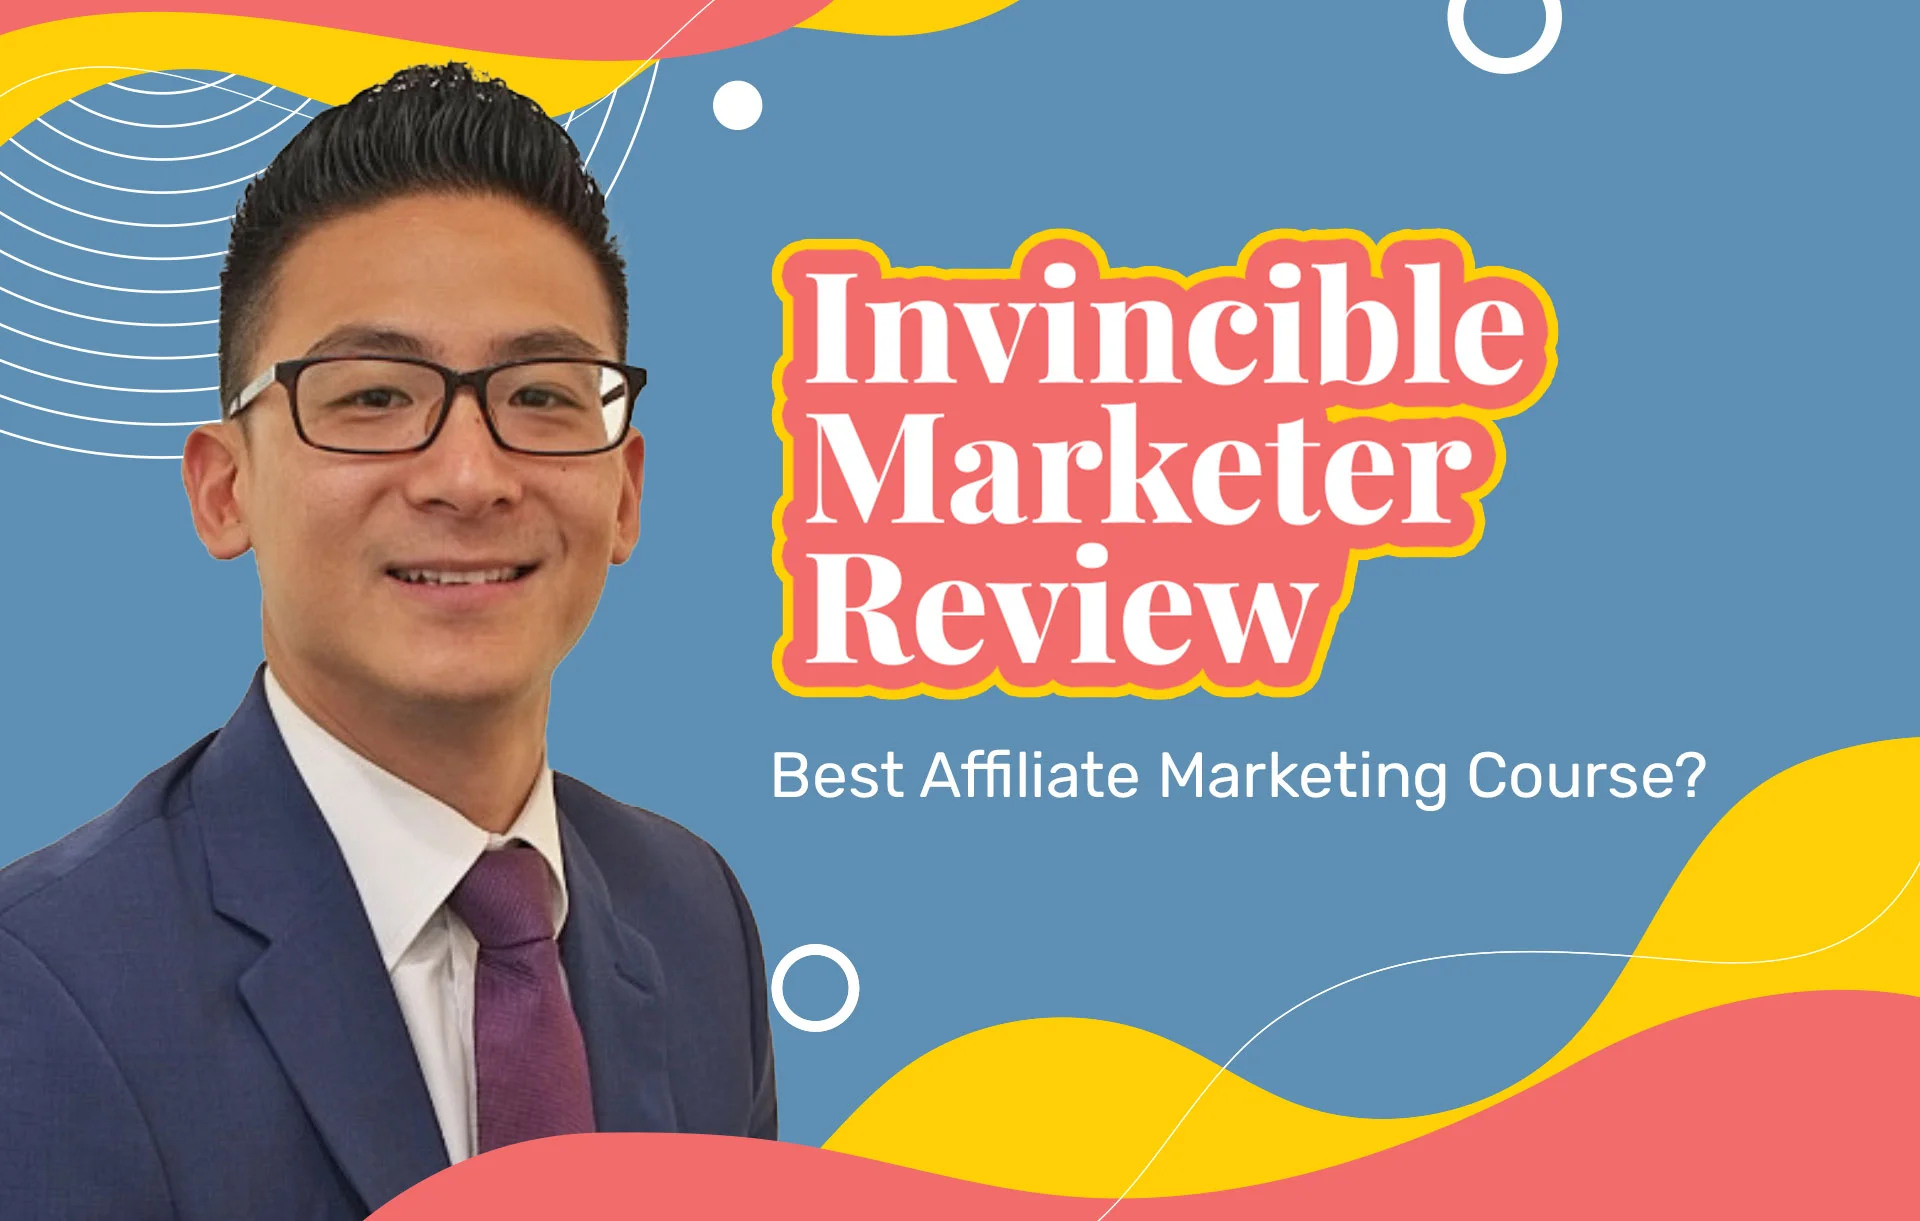 Invincible Marketer Review (2023 Update): Best Affiliate Marketing Course?